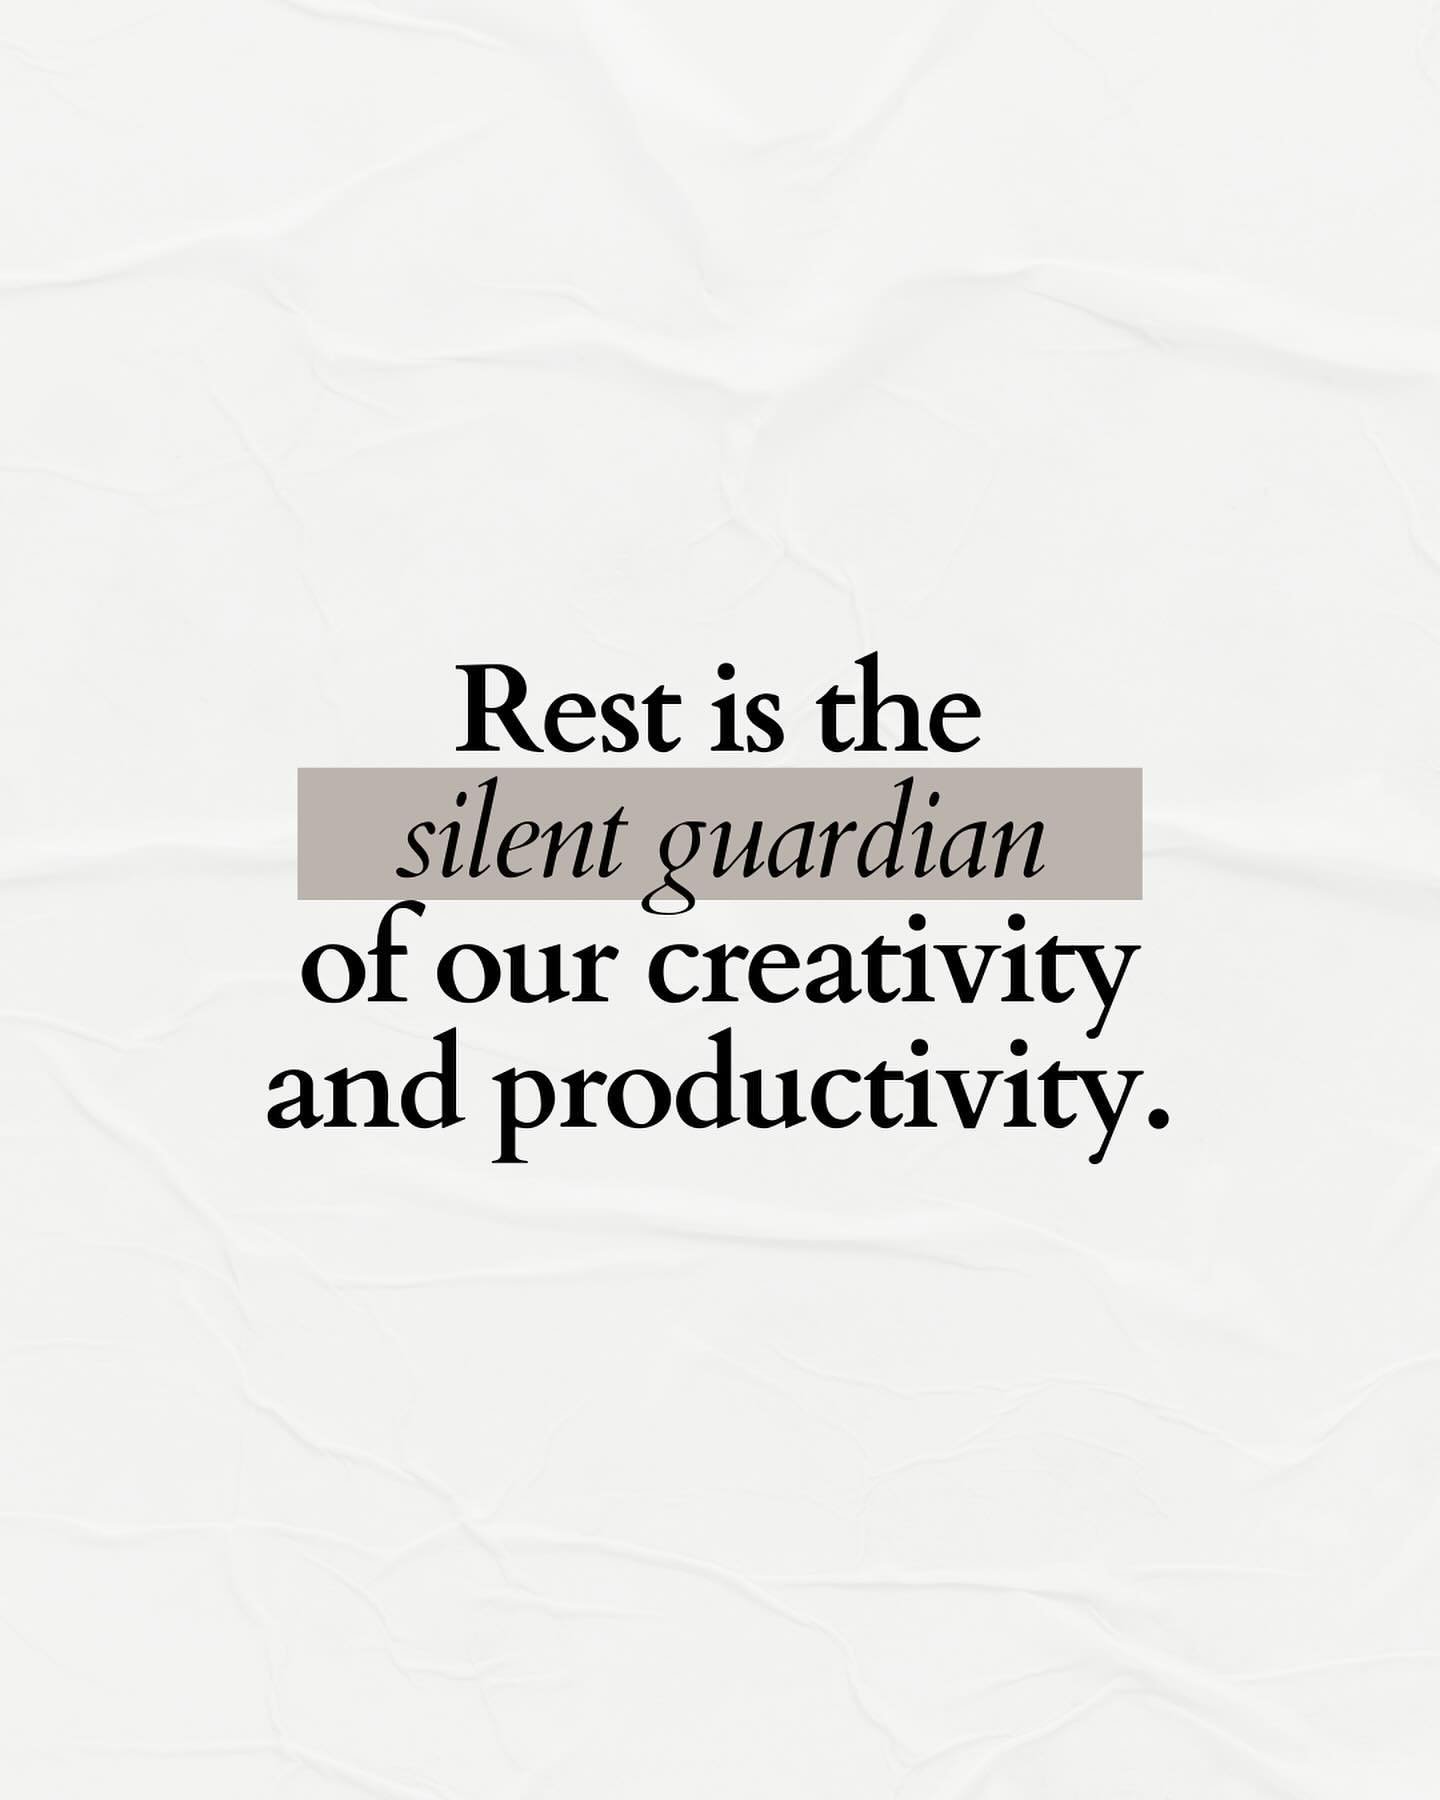 Just as we faithfully charge our phones every night, rest serves as our daily charger, replenishing our mental and emotional batteries. Just as our devices need regular recharging to function optimally, our minds and bodies require rest to maintain p